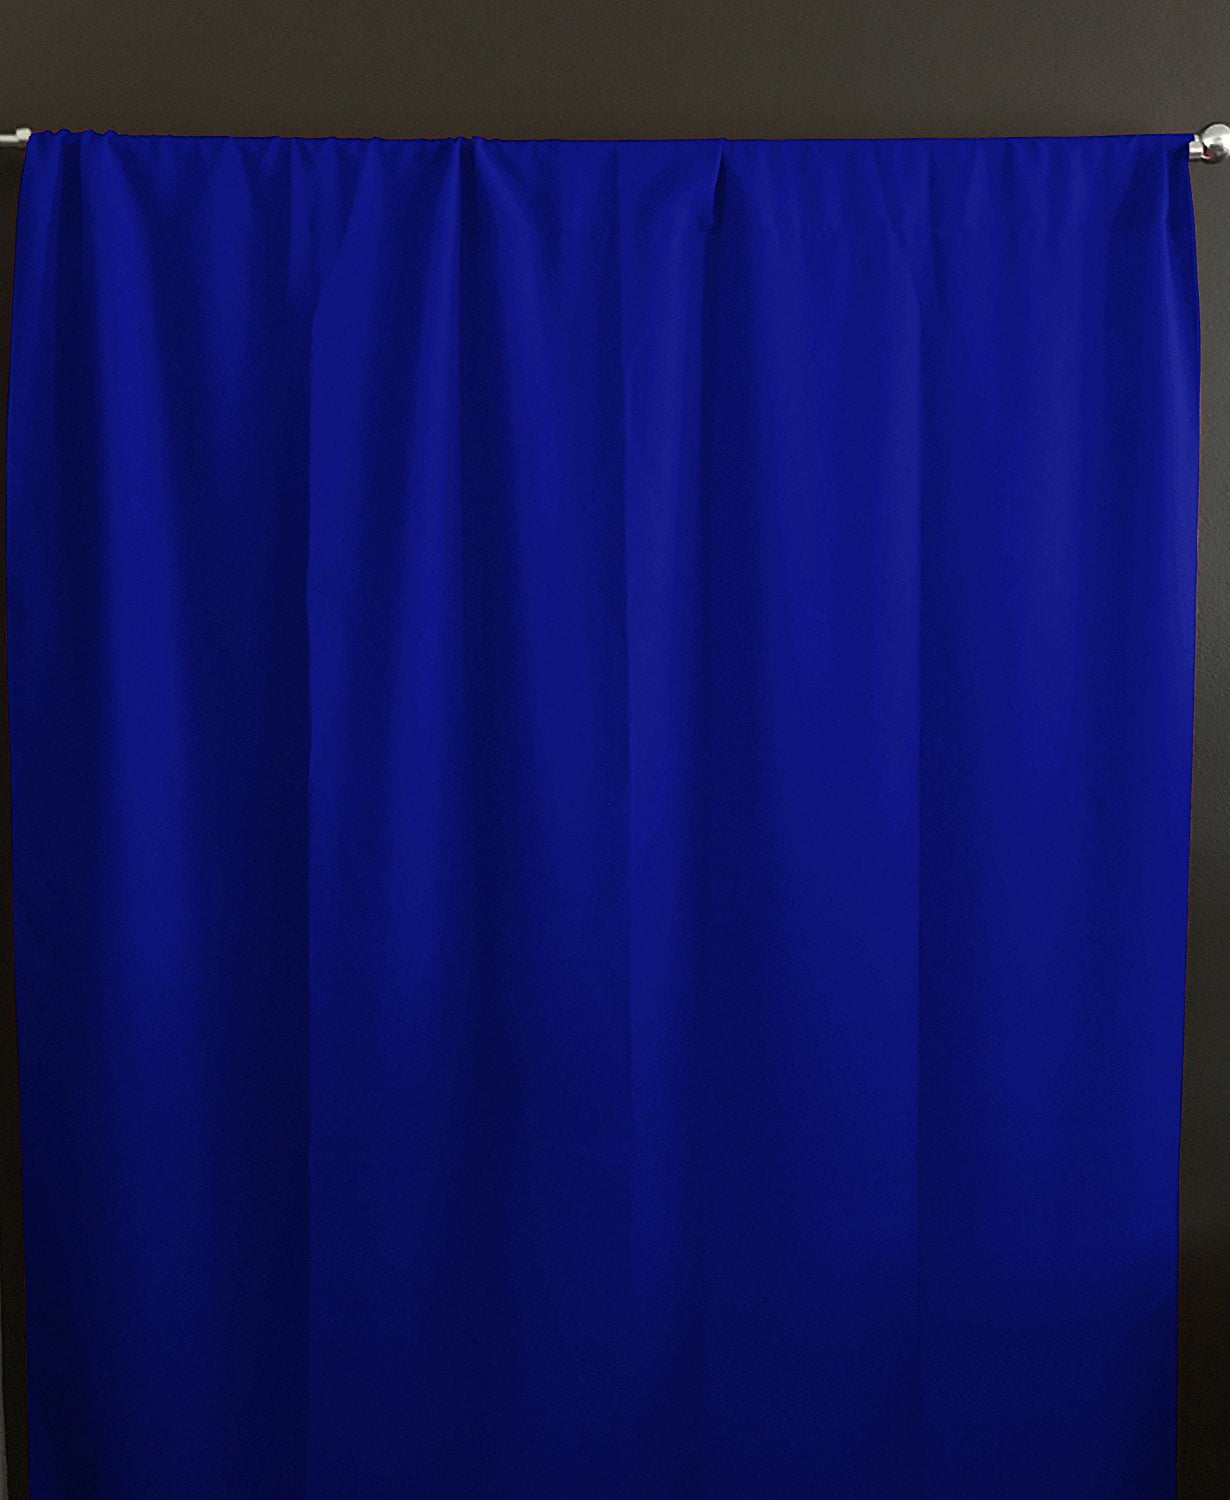 Used 3Mx3M Three Fold Blue Wedding Stage Backdrop with Silk Fabric Blue Color 